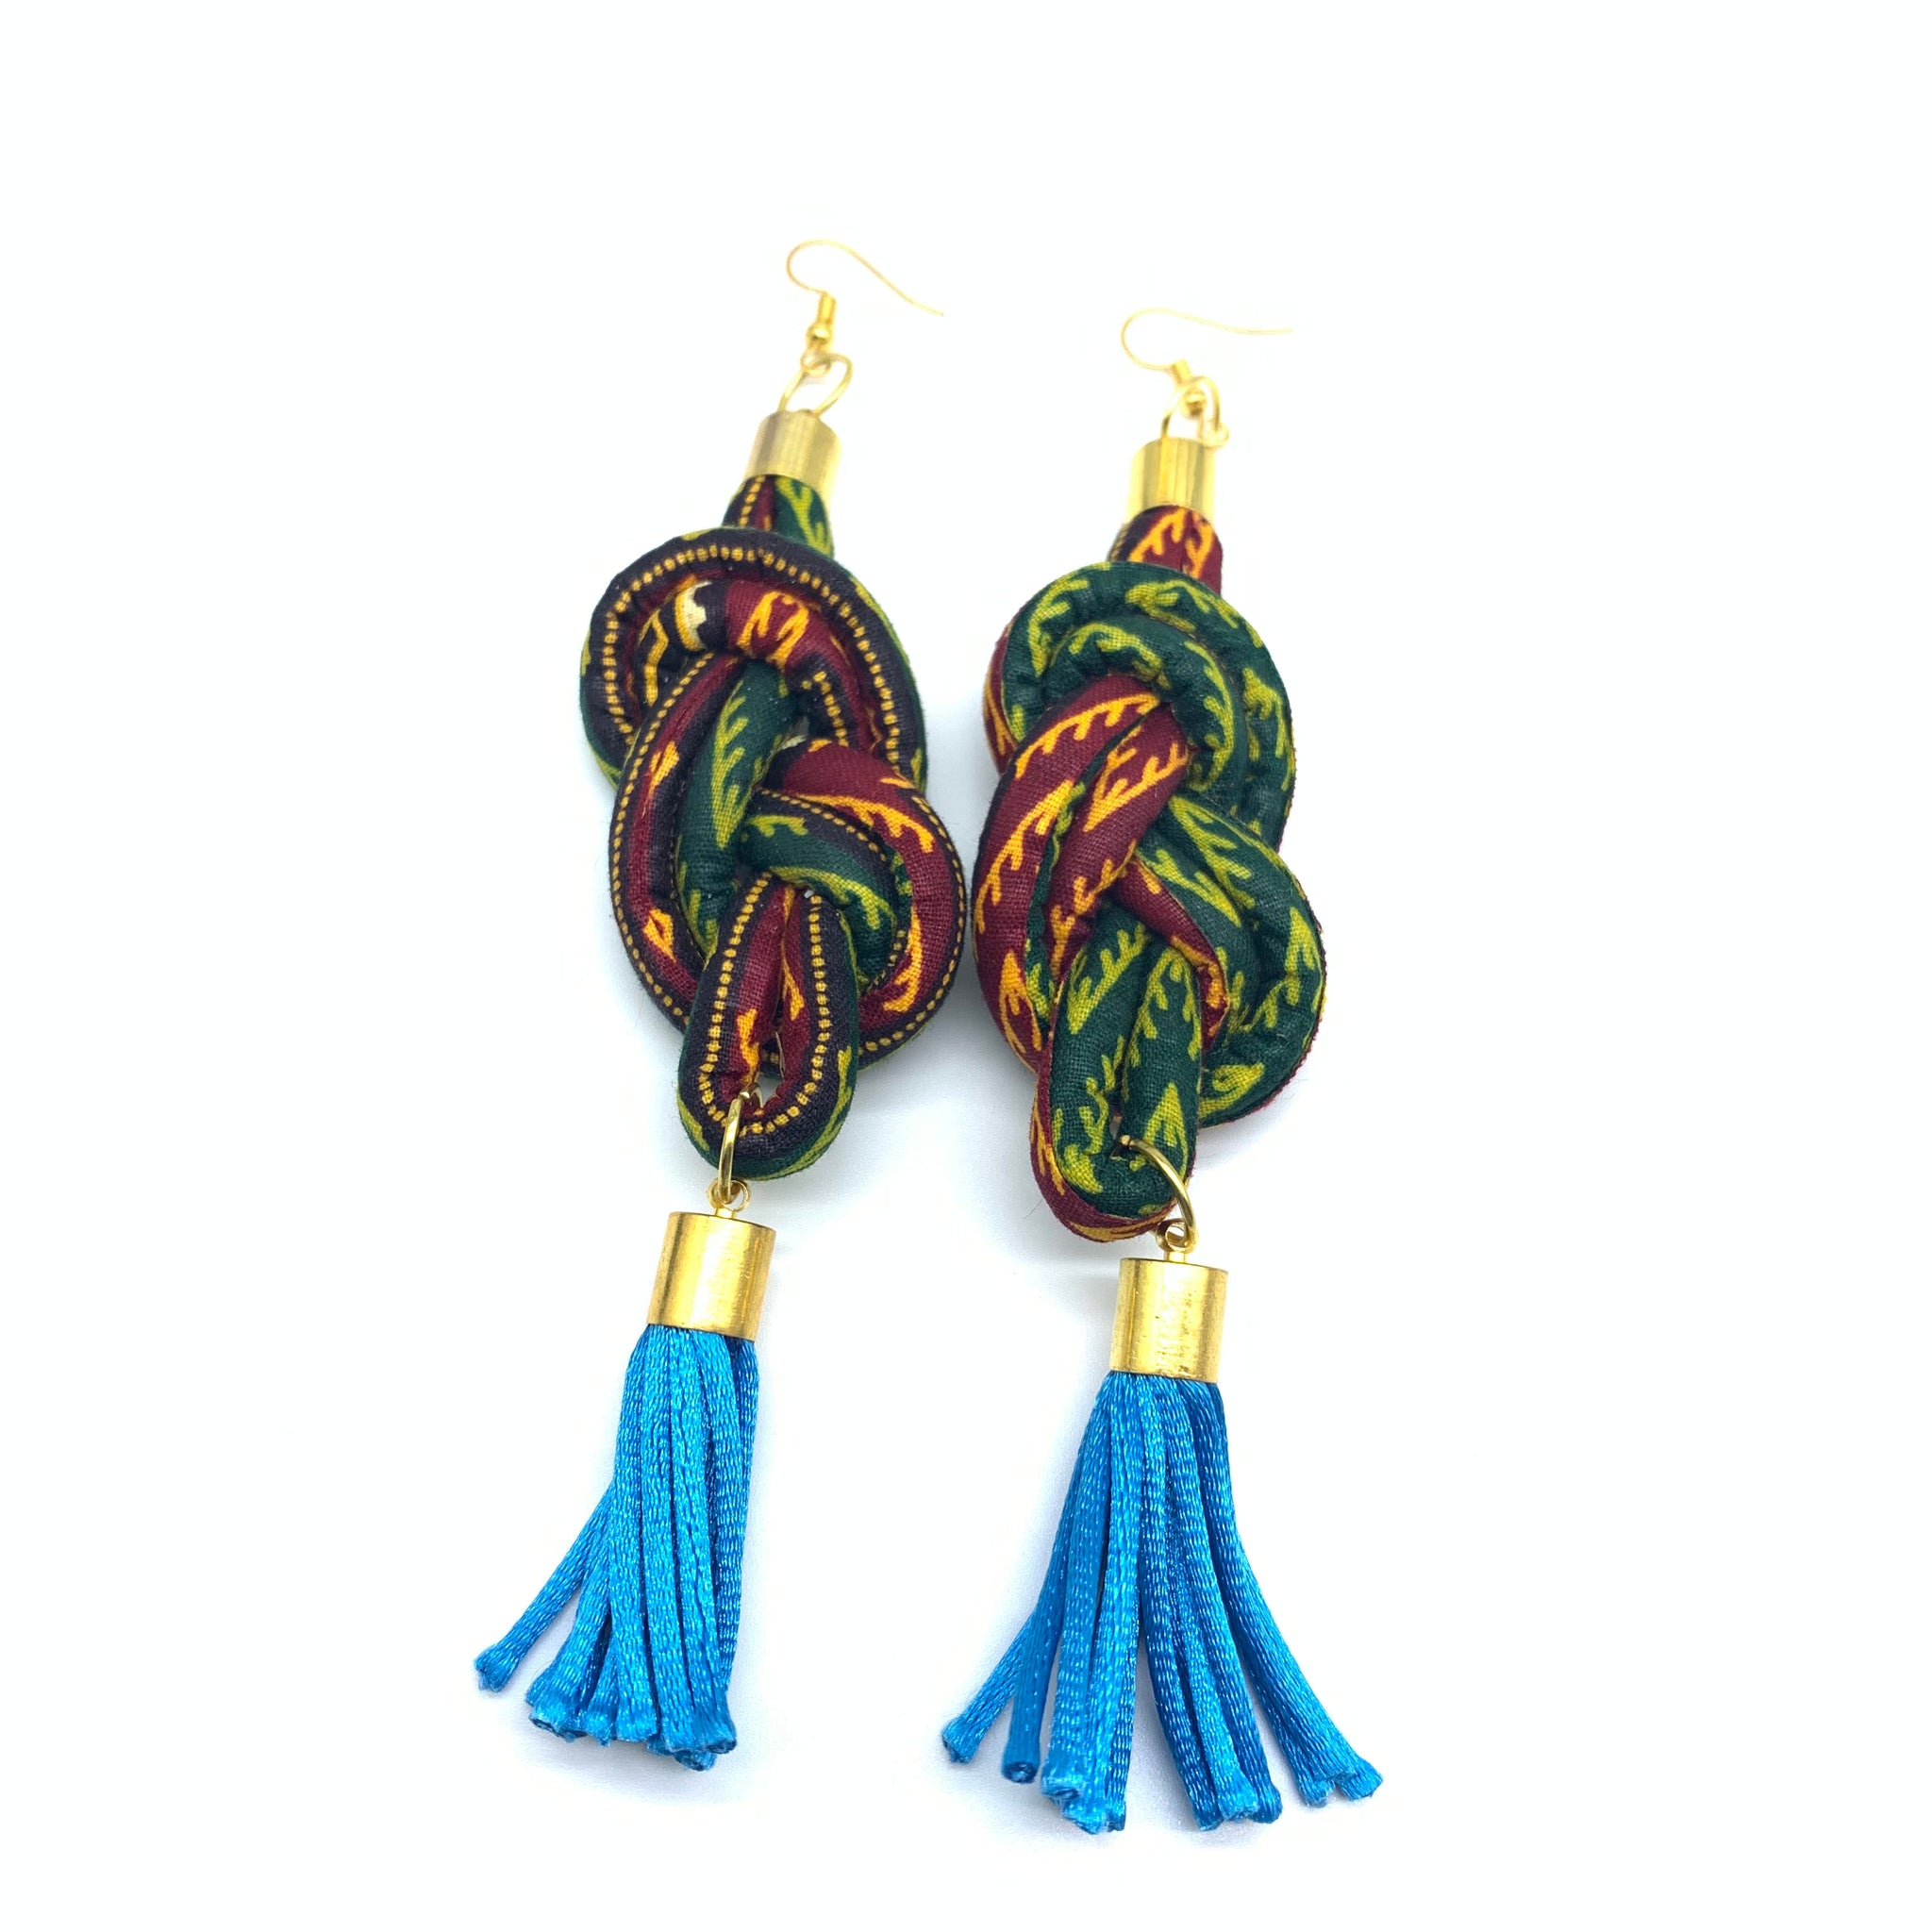 African Print Earrings-Knotted L Green Variation 10